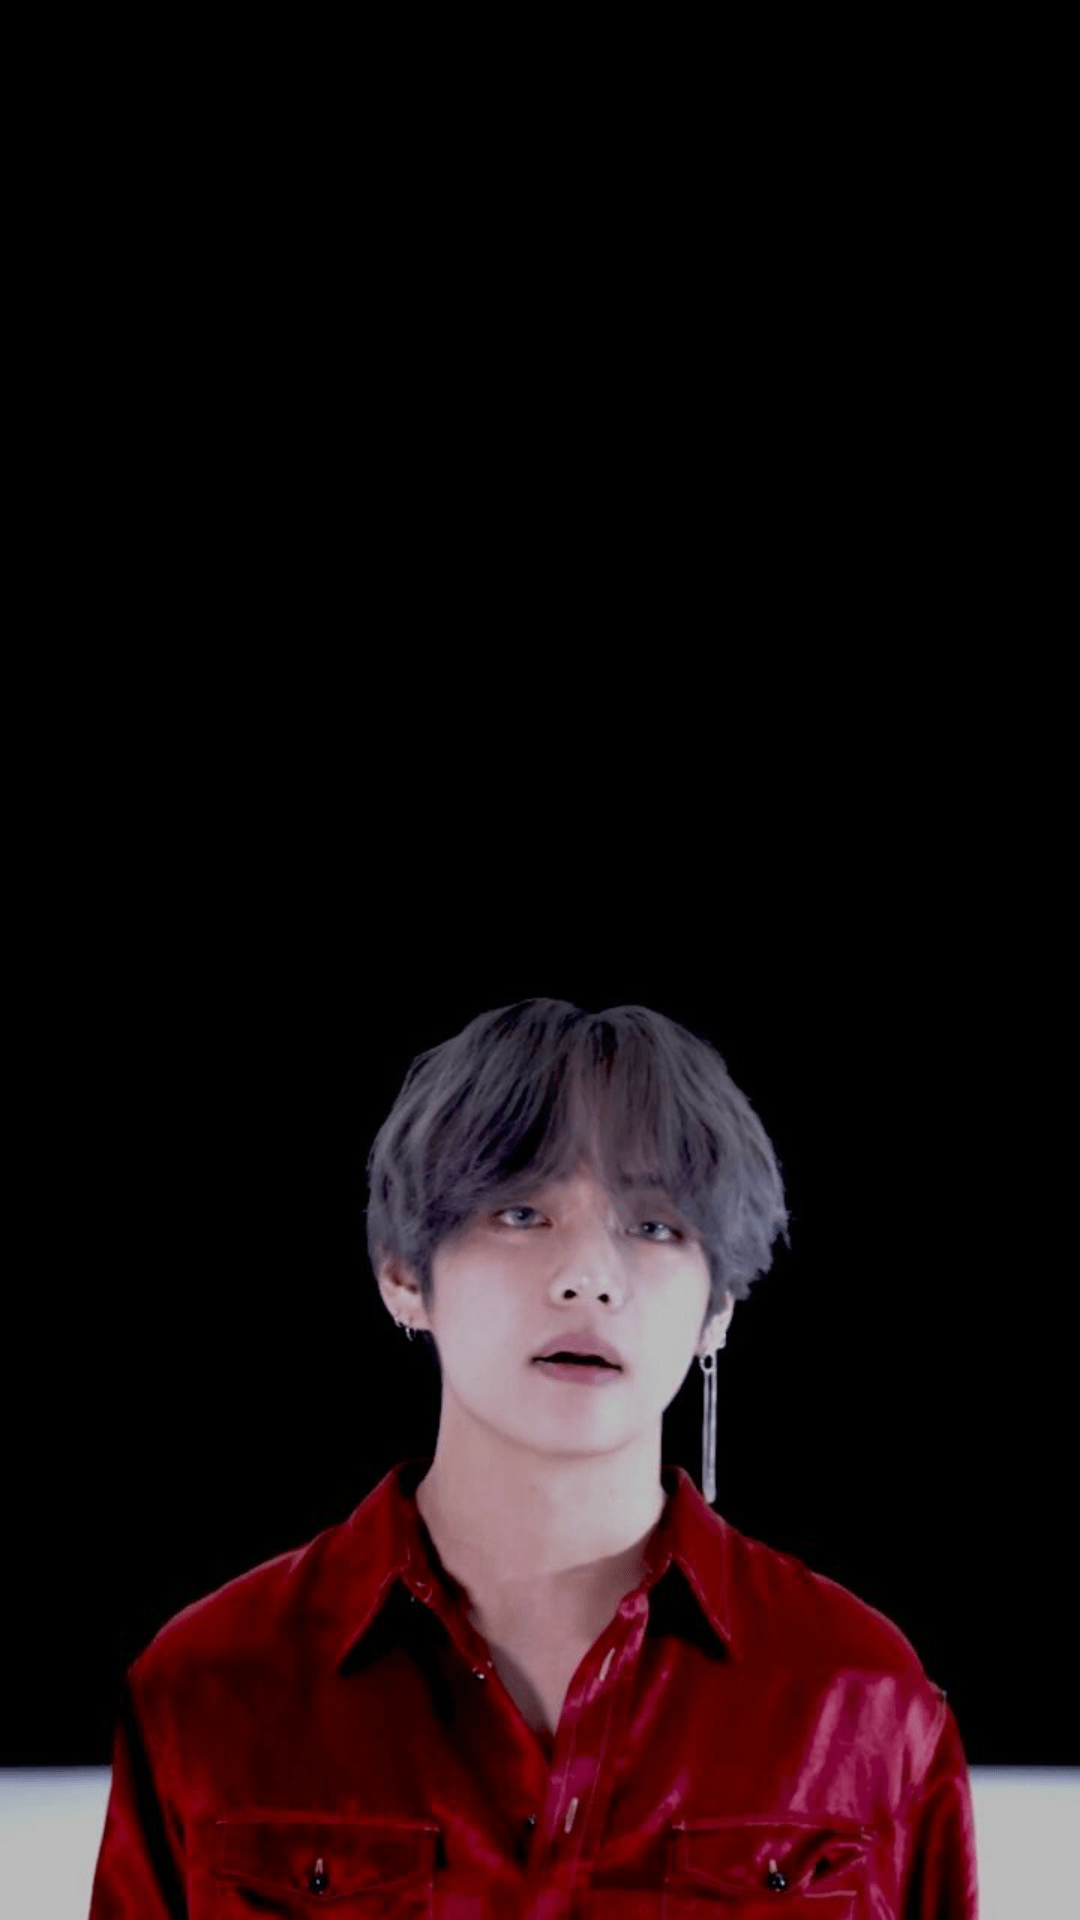 BTS Taehyung Wallpapers - Top Free BTS